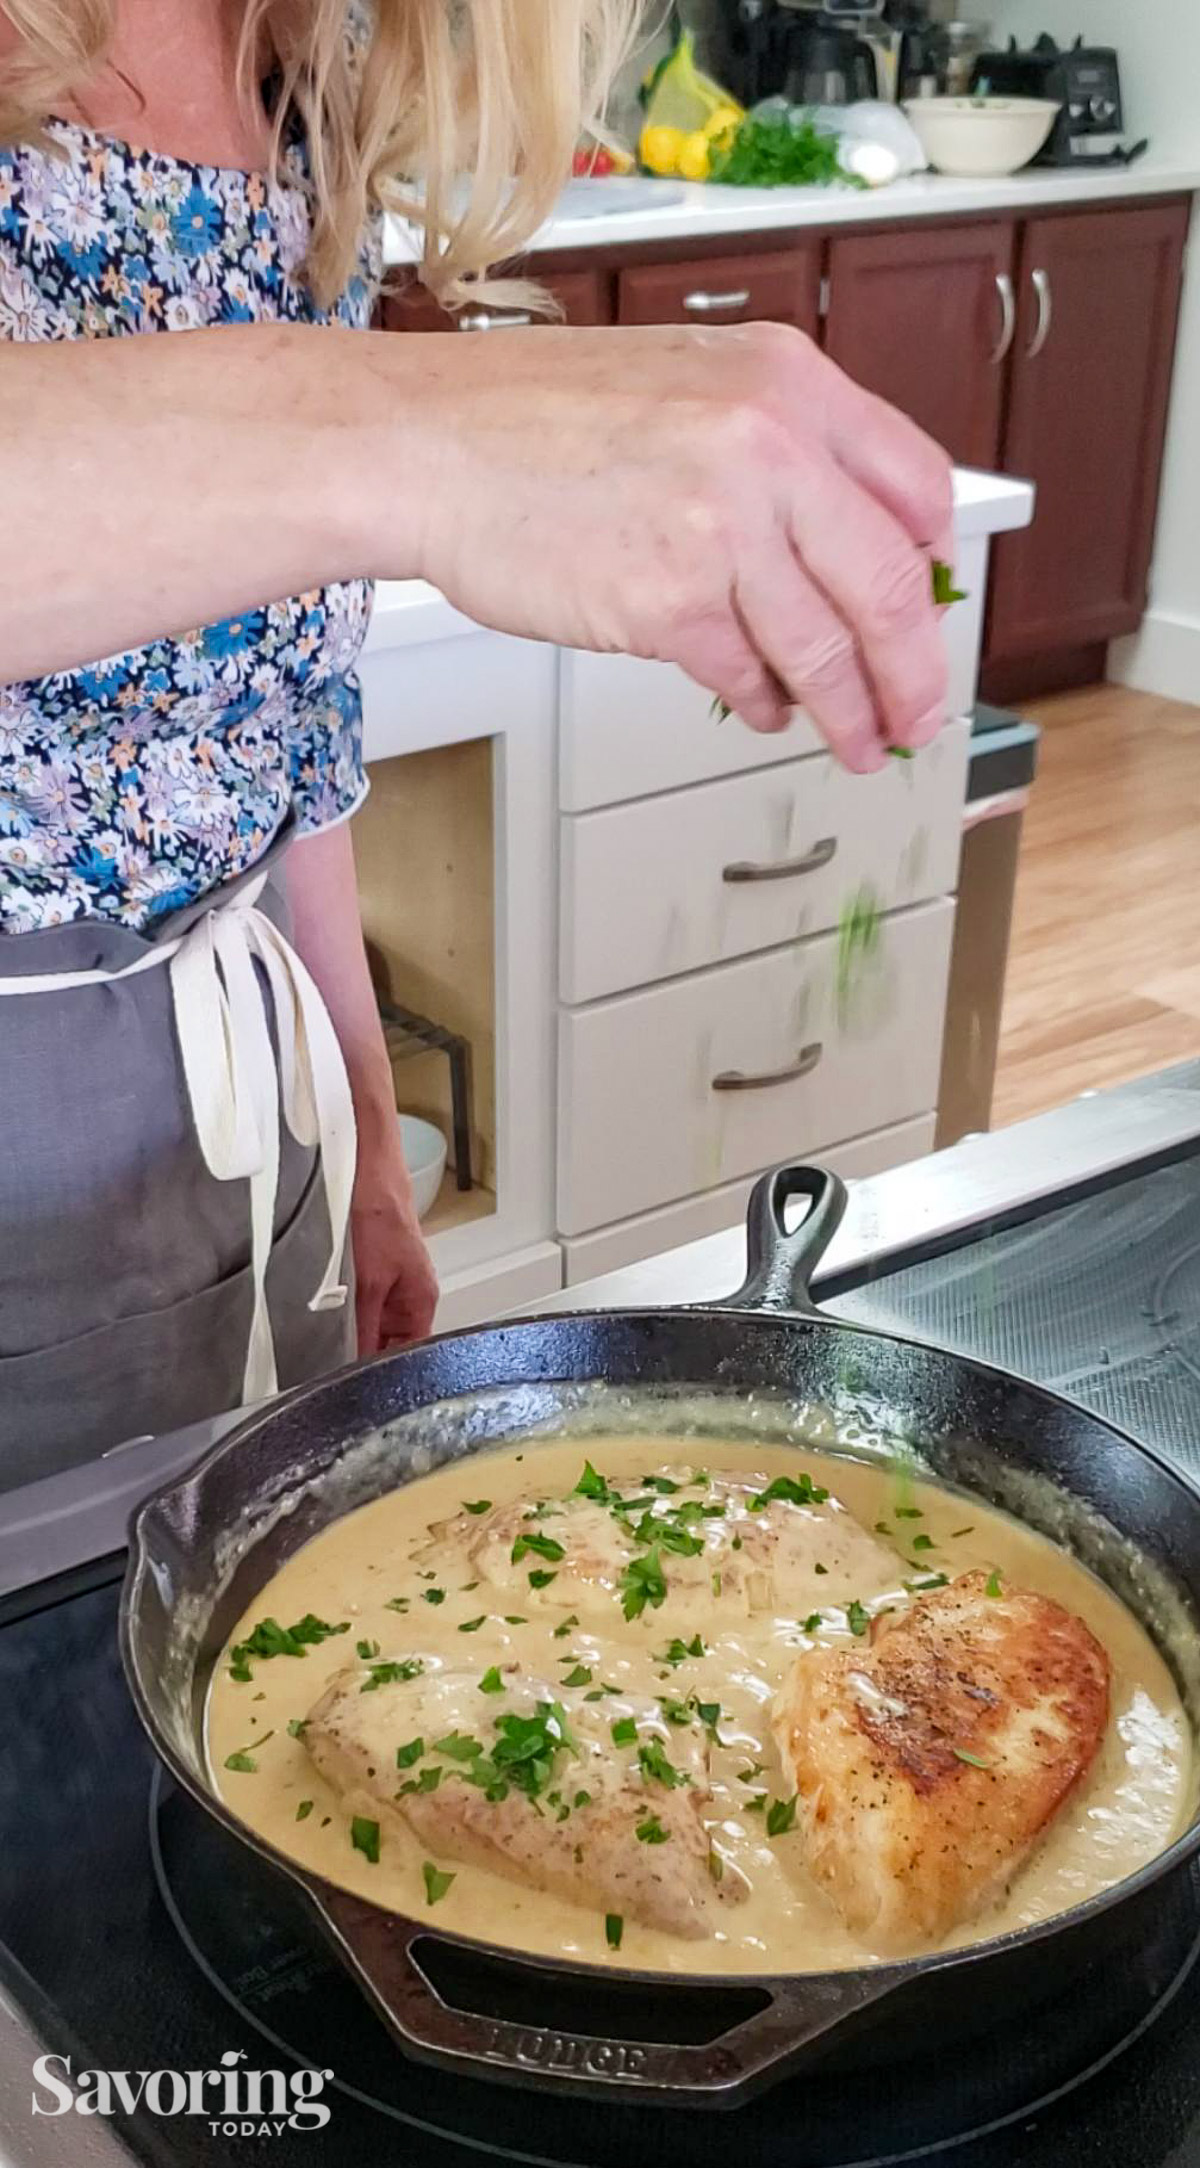 sprinkling parsley over the chicken and sauce in skillet to serve